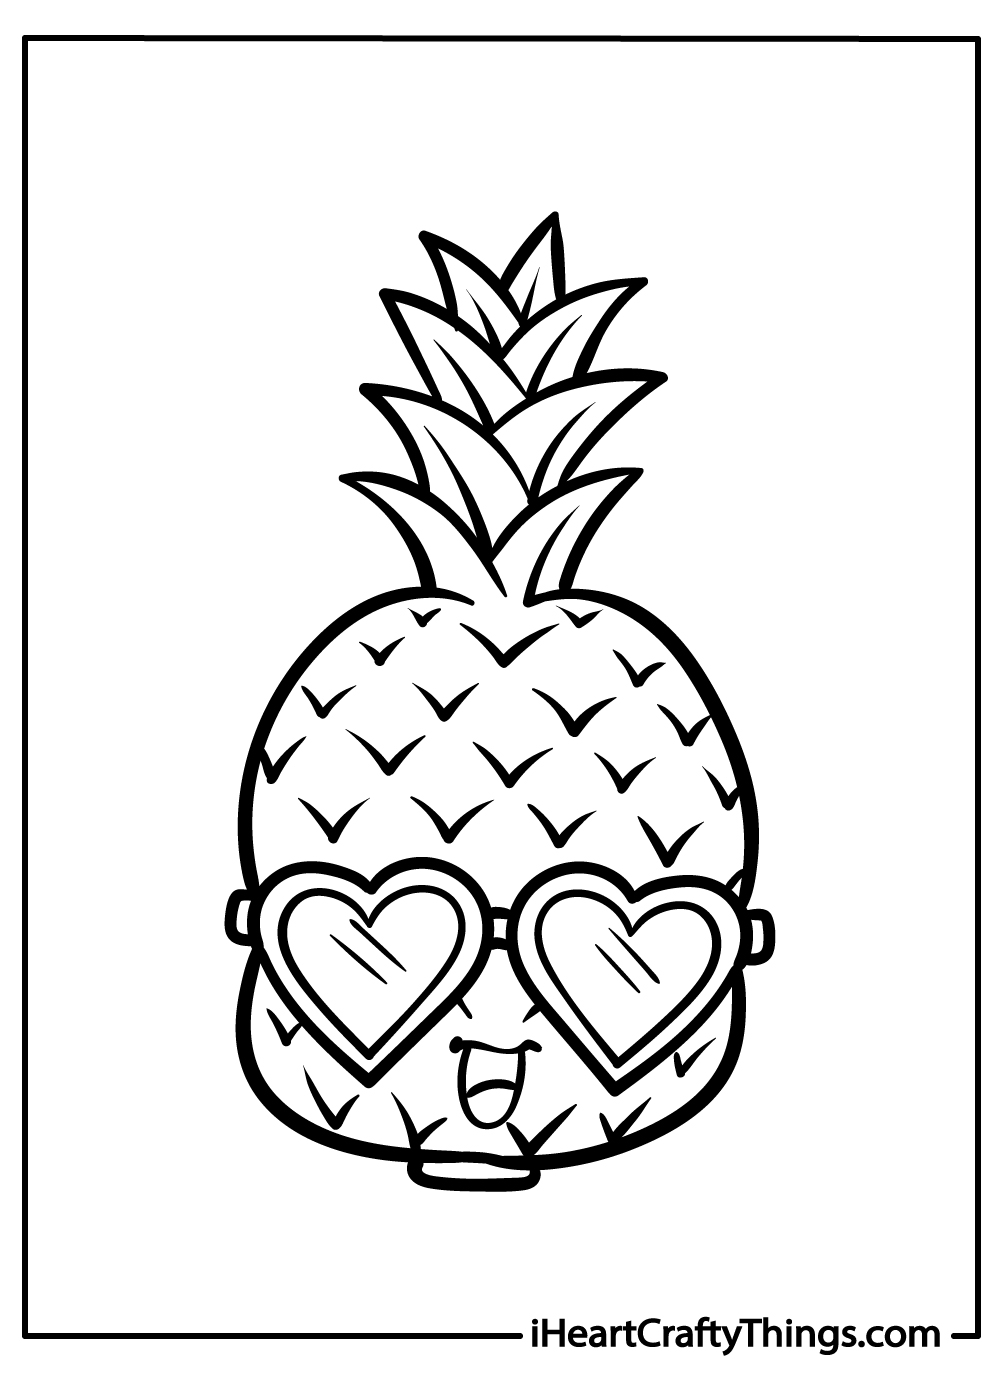 pineapple coloring pages for adults